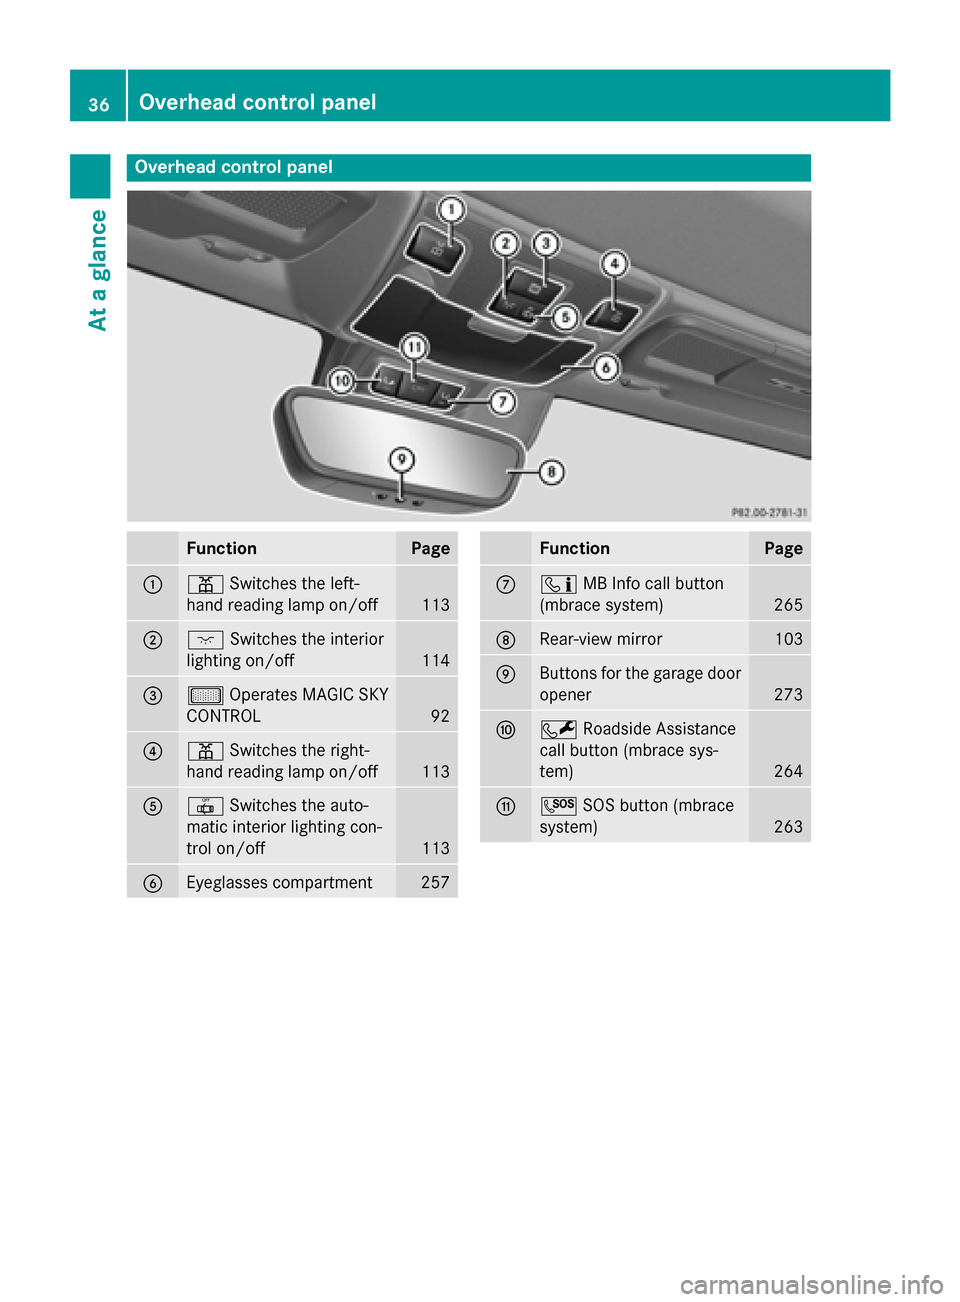 MERCEDES-BENZ SLK-Class 2015 R172 Owners Manual Overhead control panel
Function Page
0043
003D
Switches the left-
hand reading lamp on/off 113
0044
004A
Switches the interior
lighting on/off 114
0087
00B7
Operates MAGIC SKY
CONTROL 92
0085
003D
Swi